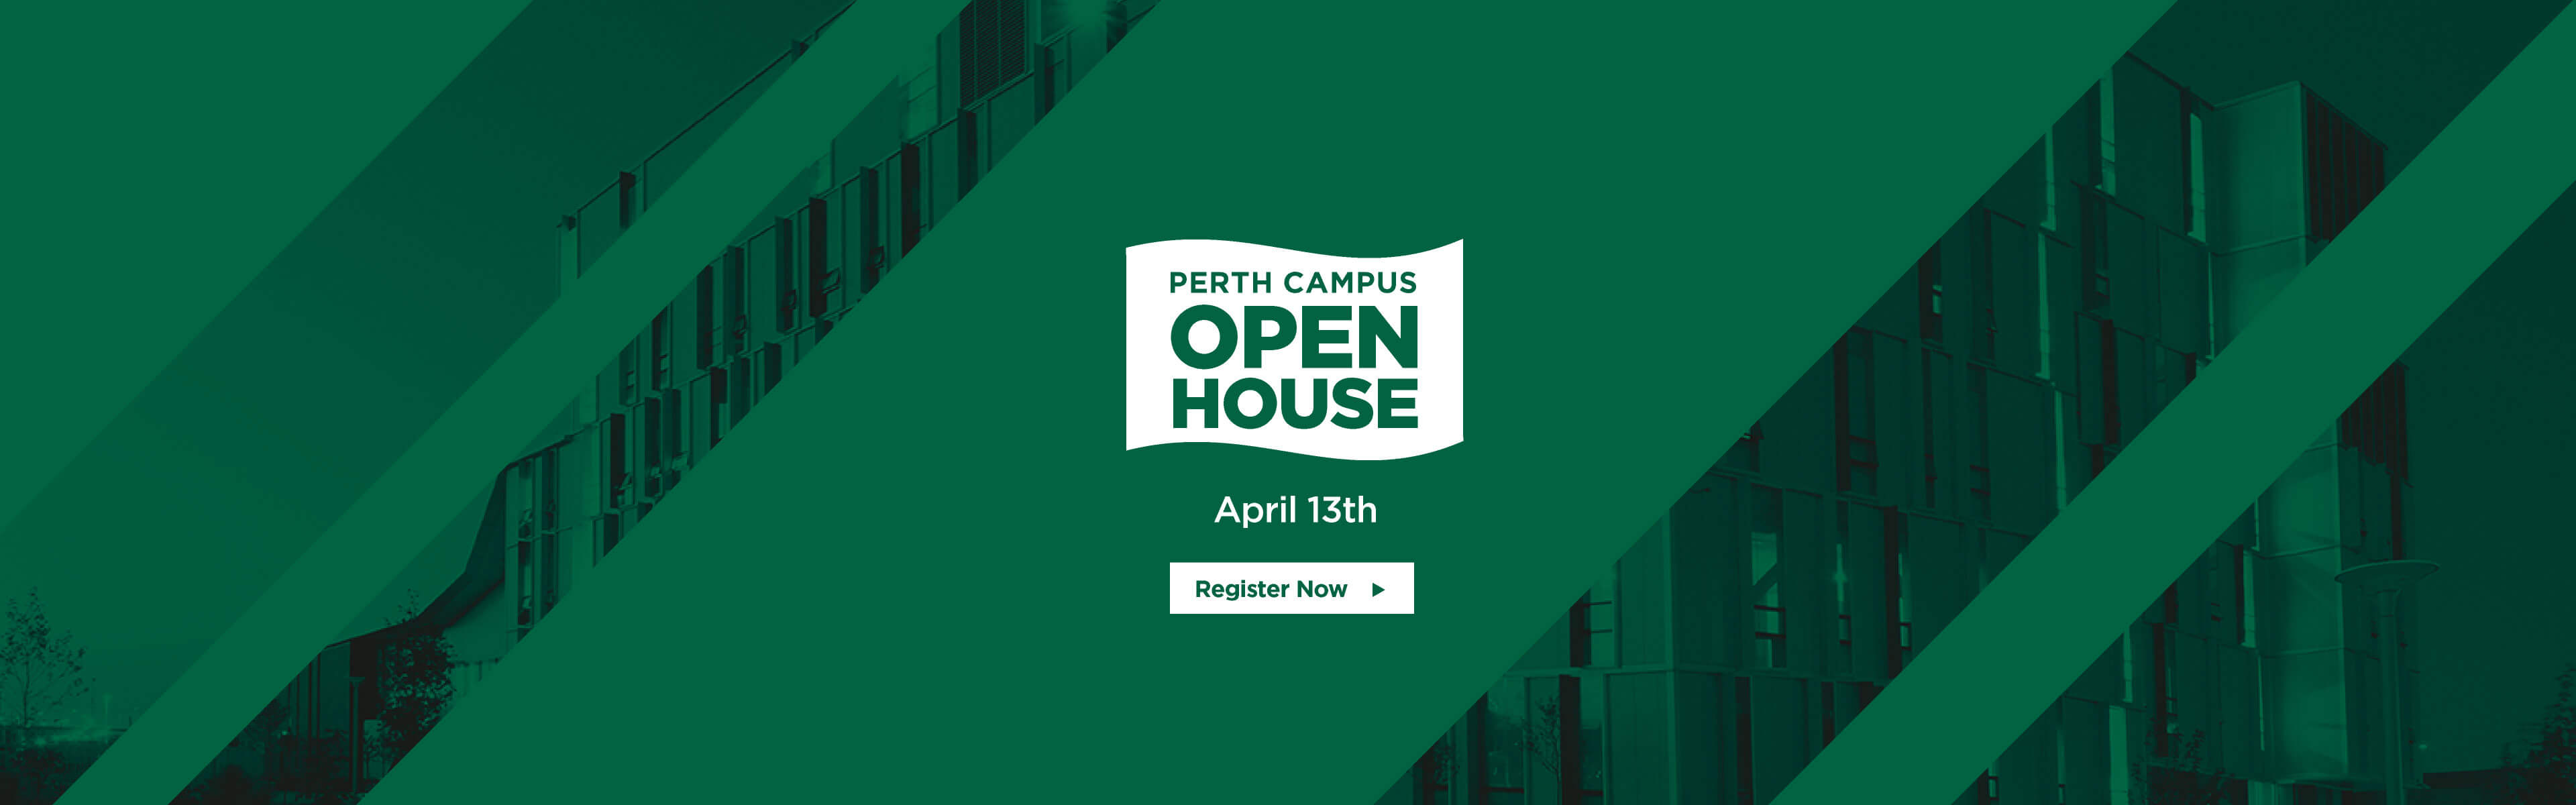 Open House Perth Campus